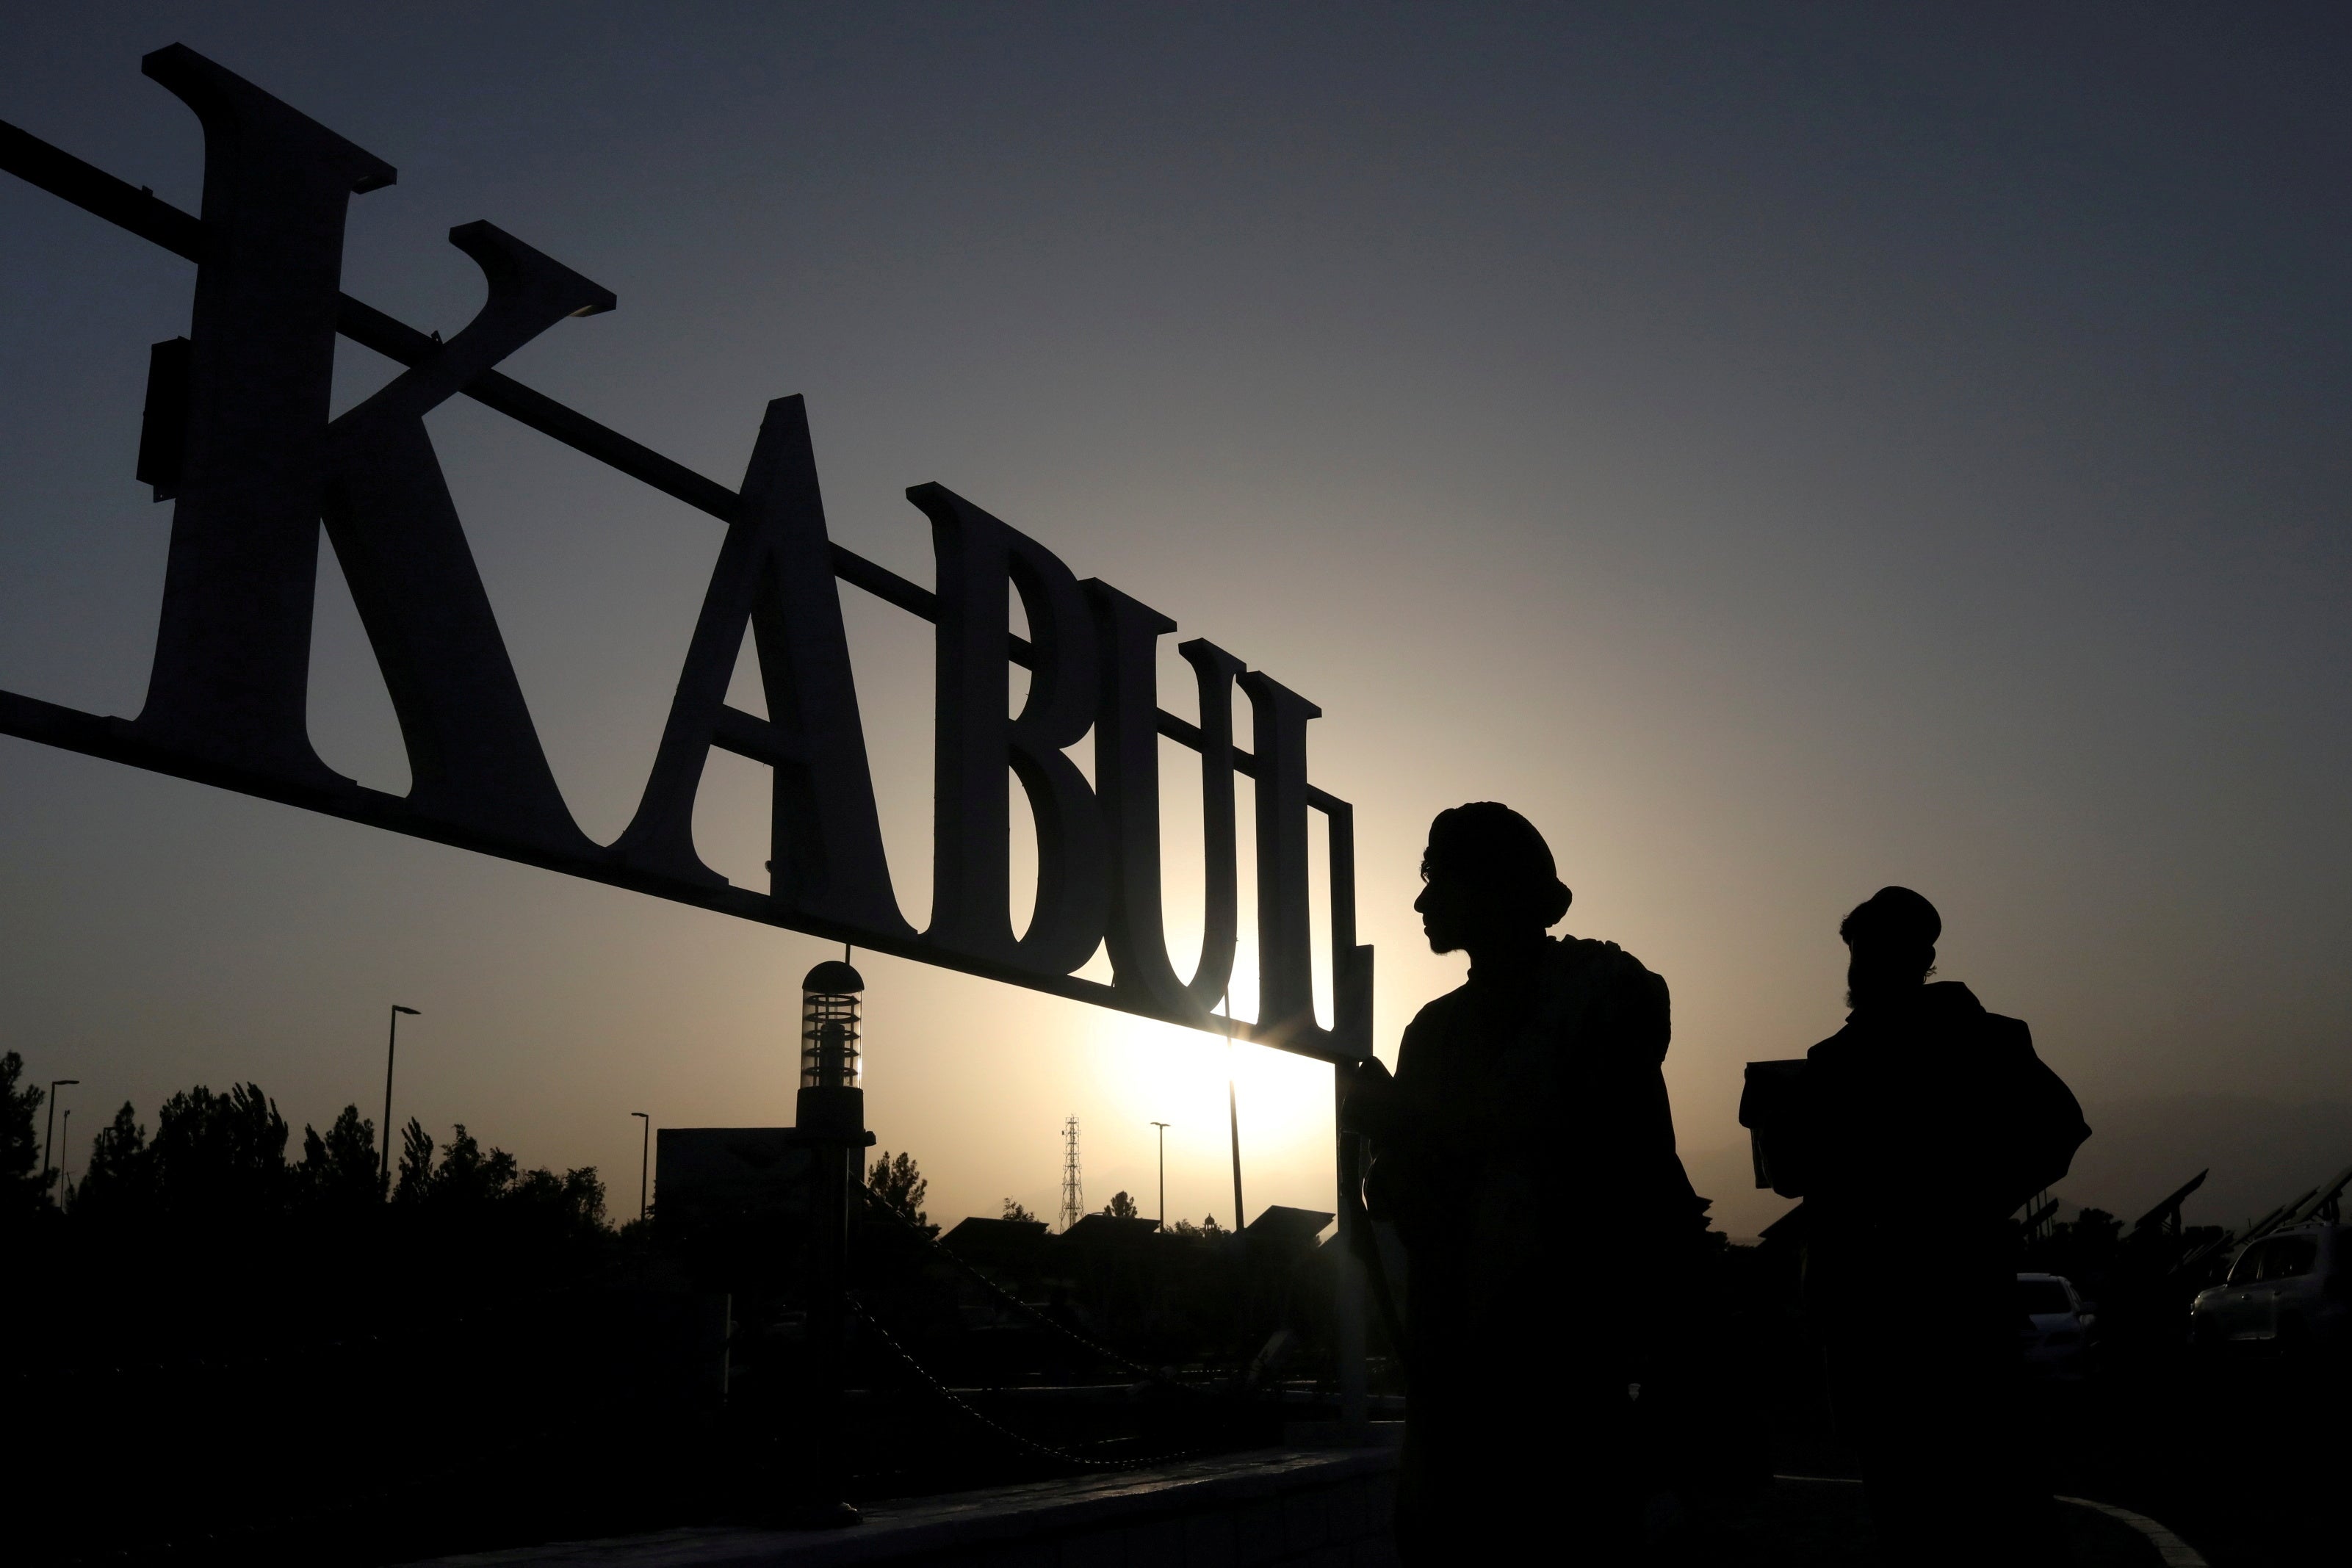 Taliban soldiers stand in front of a sign at the international airport in Kabul, Afghanistan